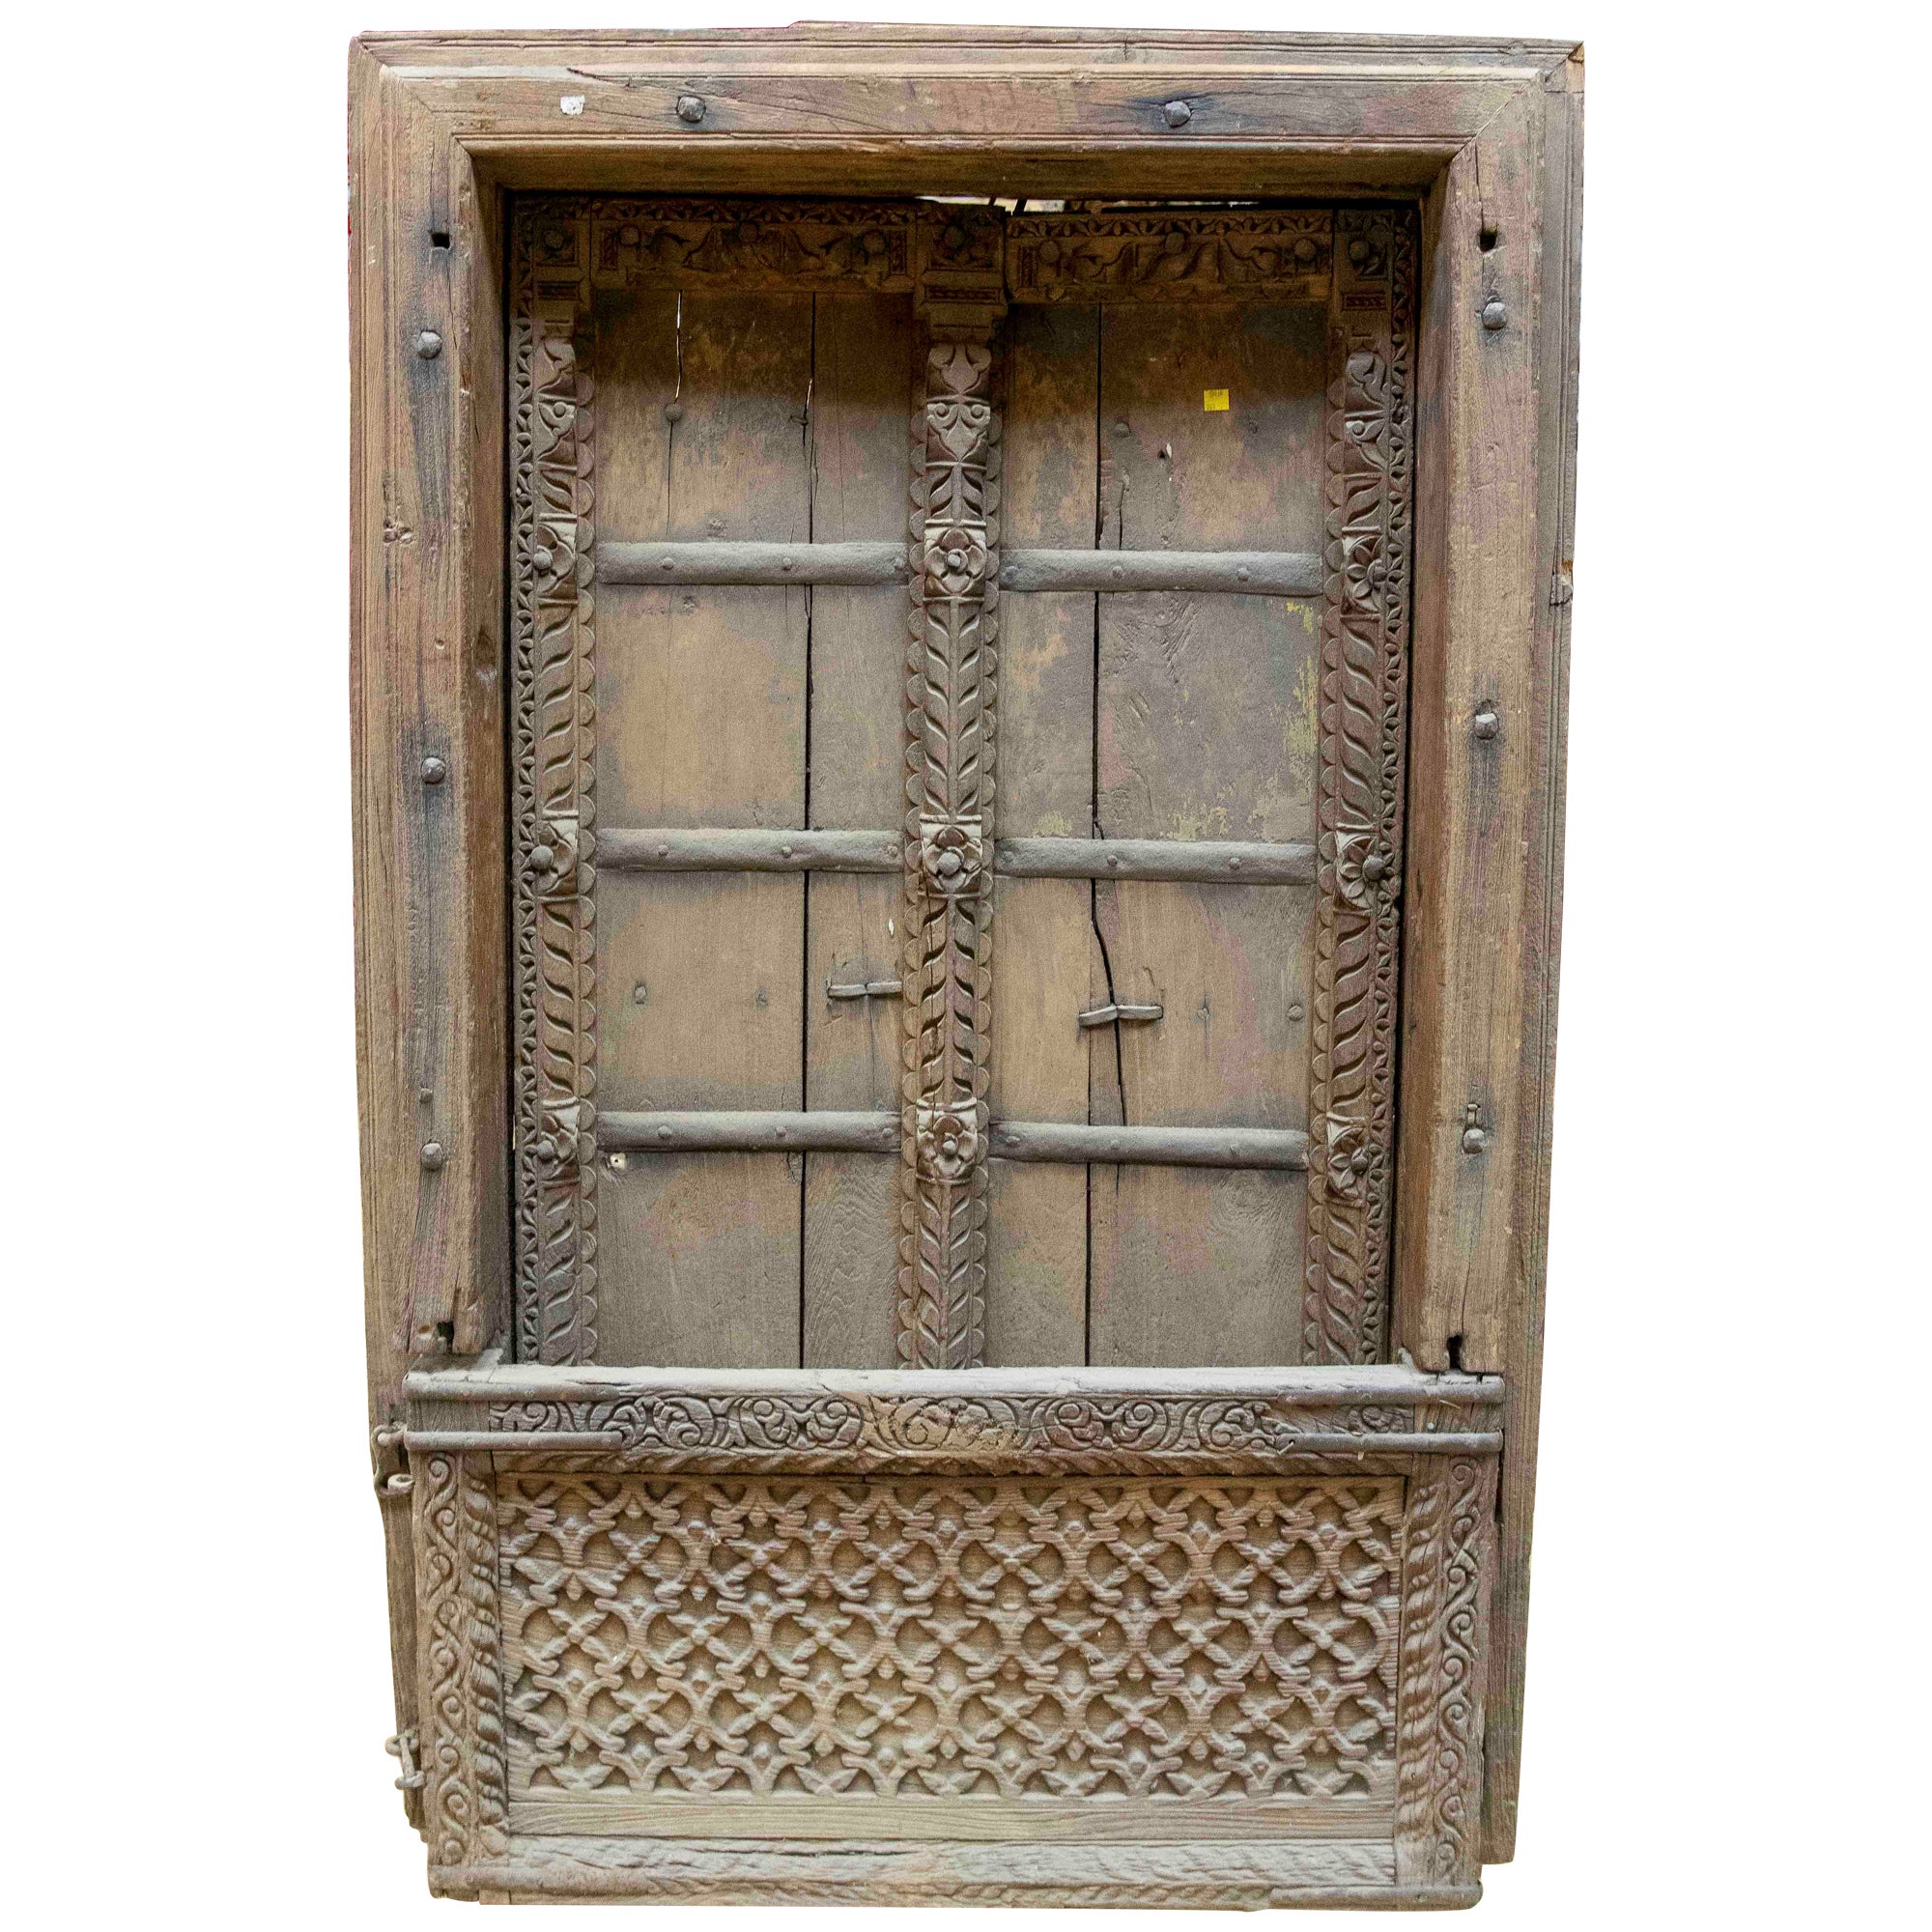 Indian Rustic Wooden Window with Iron Decorations